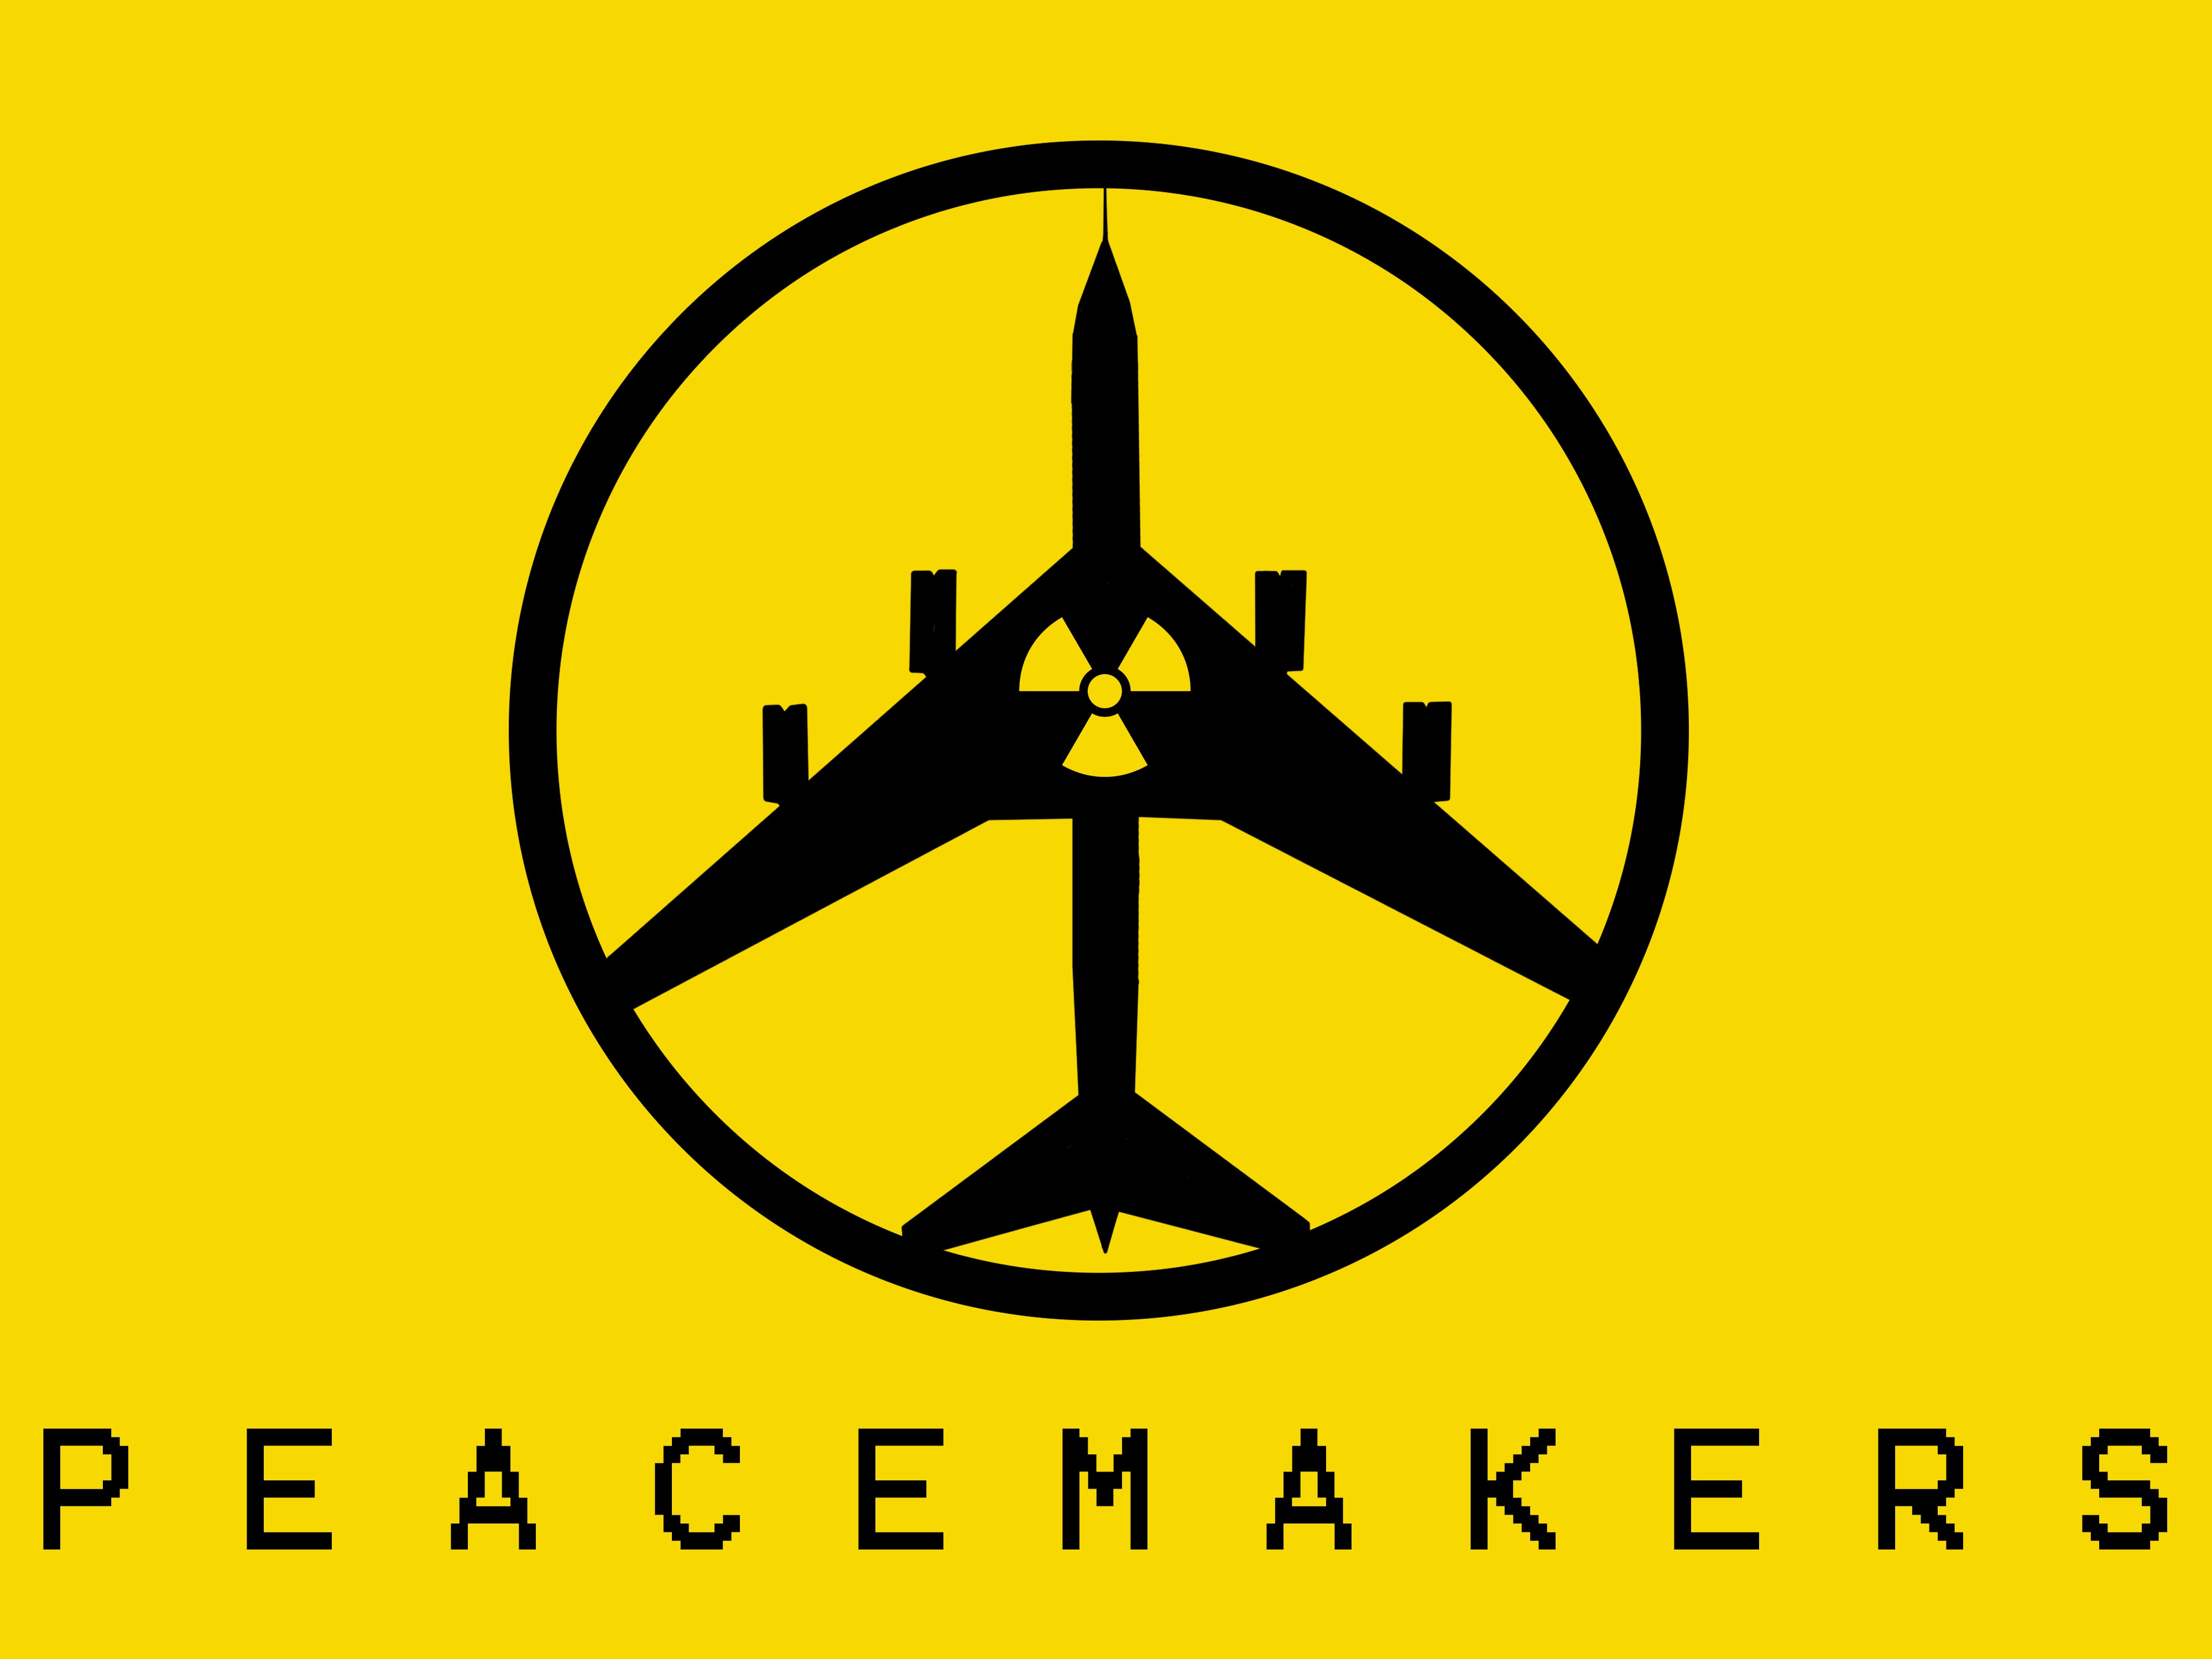 Peace War Nuclear Bomber Yellow Background Minimalism Metal Gear Solid Peace Walker 4000x3000